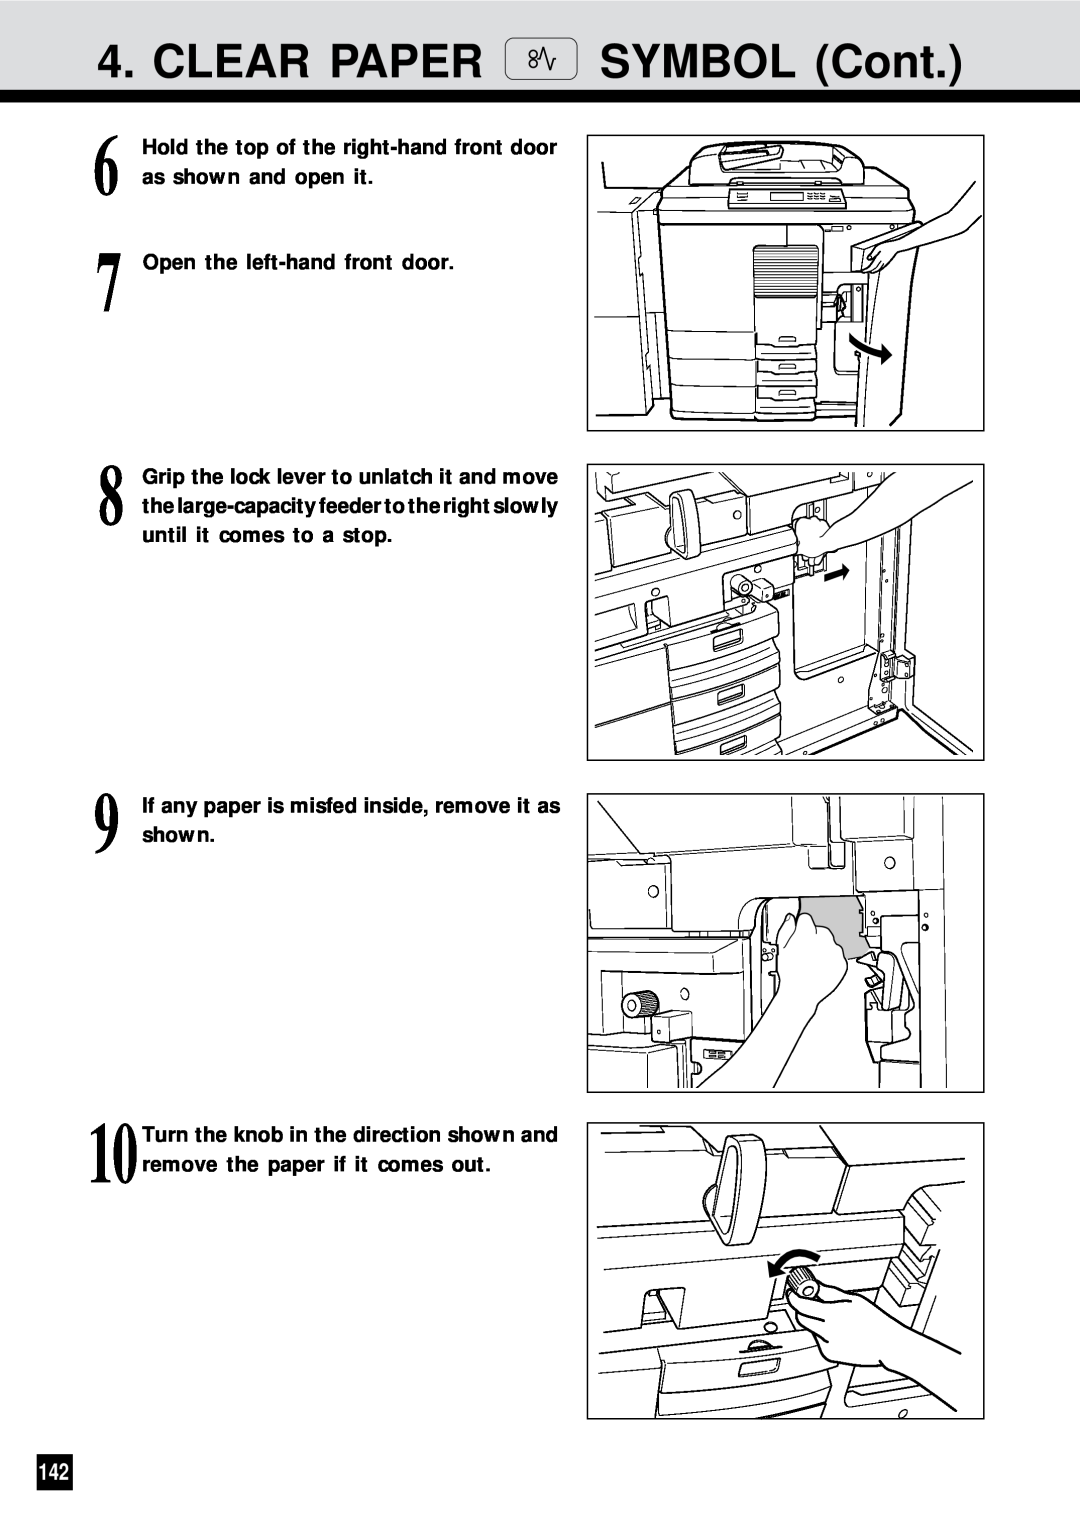 Sharp AR-650 operation manual CLEAR PAPER SYMBOL Cont, Hold the top of the right-hand front door as shown and open it 